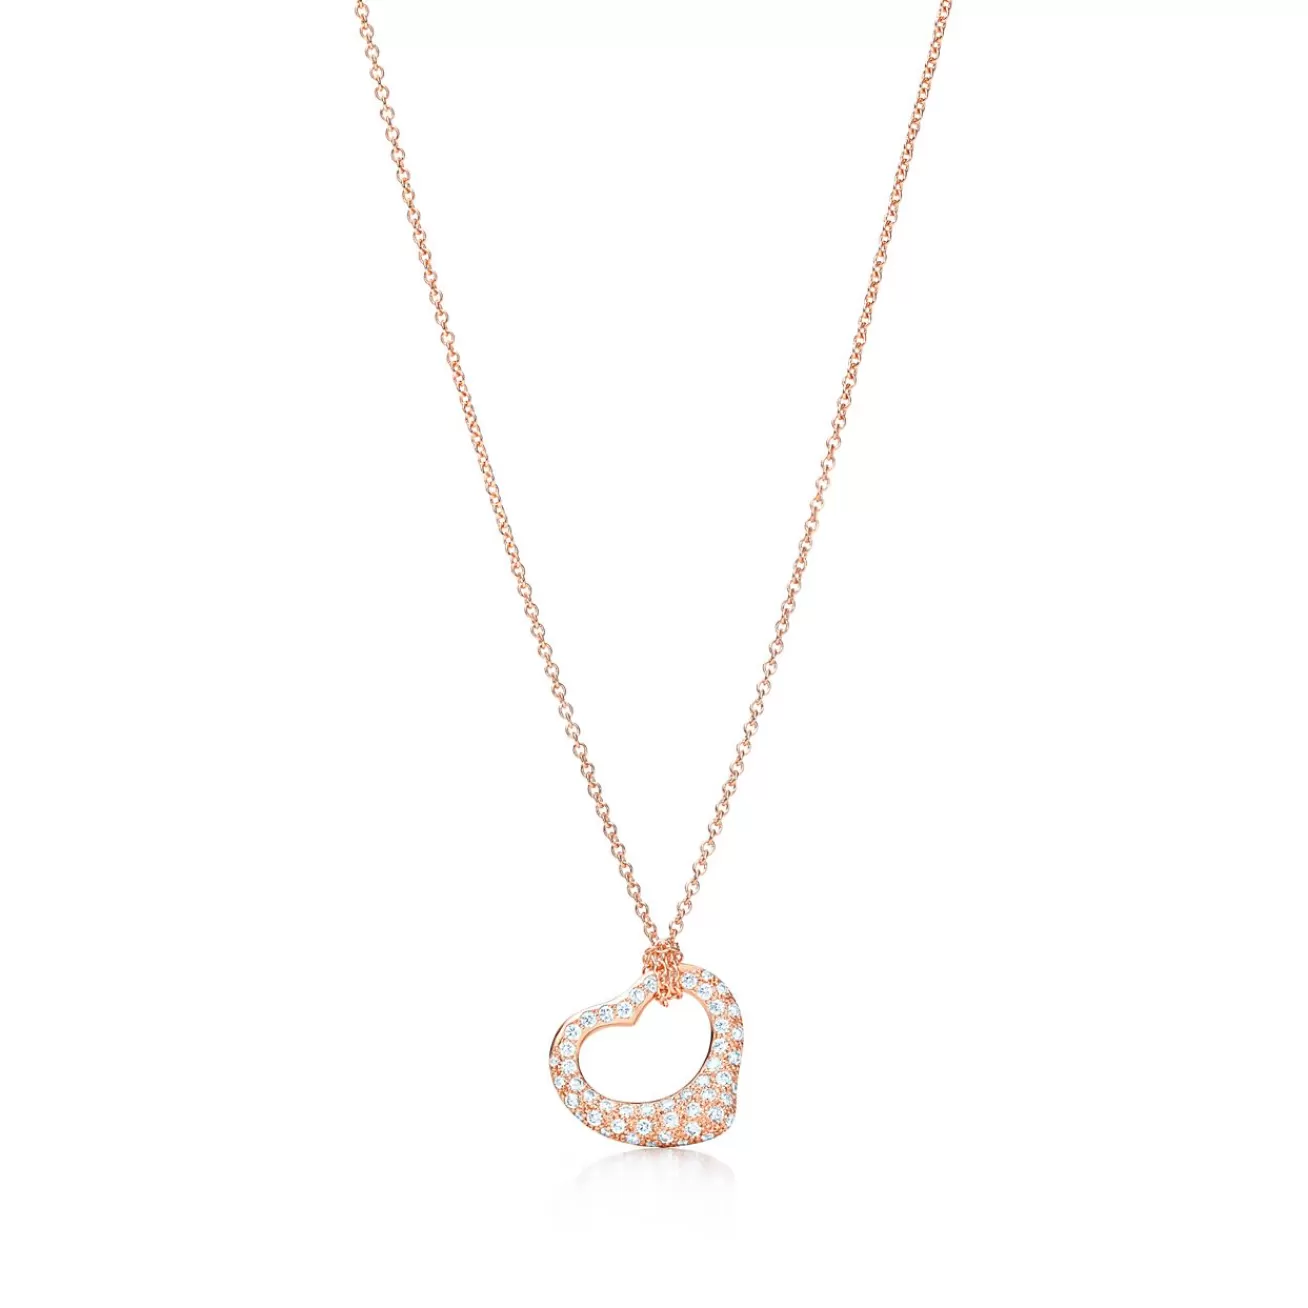 Tiffany & Co. Elsa Peretti® Open Heart pendant in 18k rose gold. More sizes available. | ^ Necklaces & Pendants | Rose Gold Jewelry